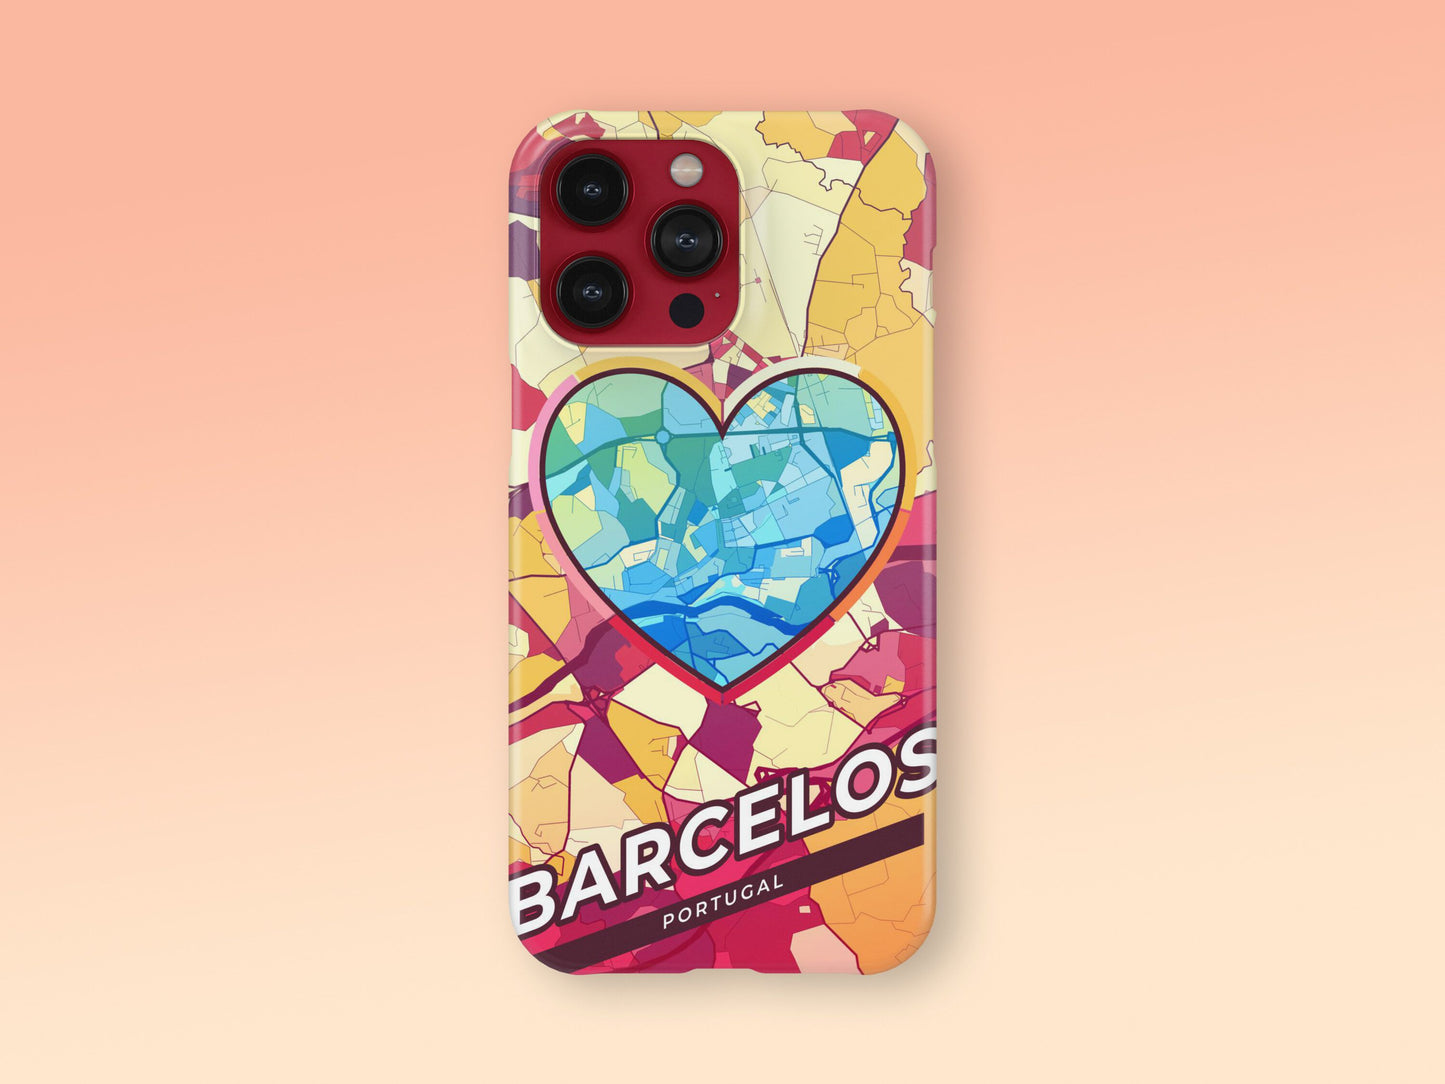 Barcelos Portugal slim phone case with colorful icon. Birthday, wedding or housewarming gift. Couple match cases. 2